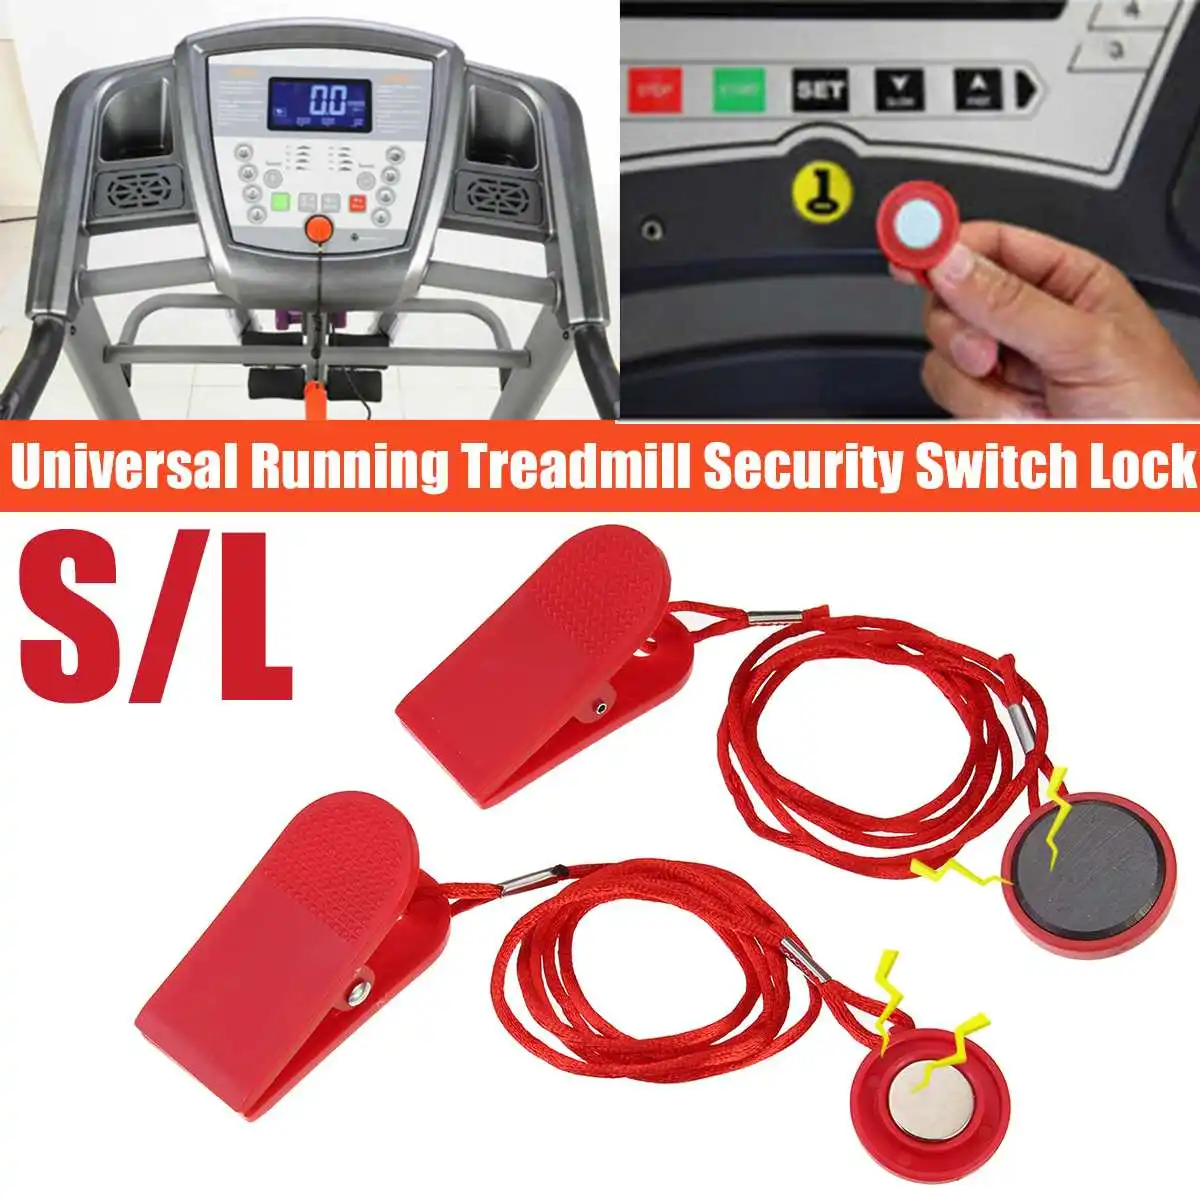 Running Machine Magnetic Security Switch Lock Fitness Universal Accessories tegongse Treadmill Safety Key 